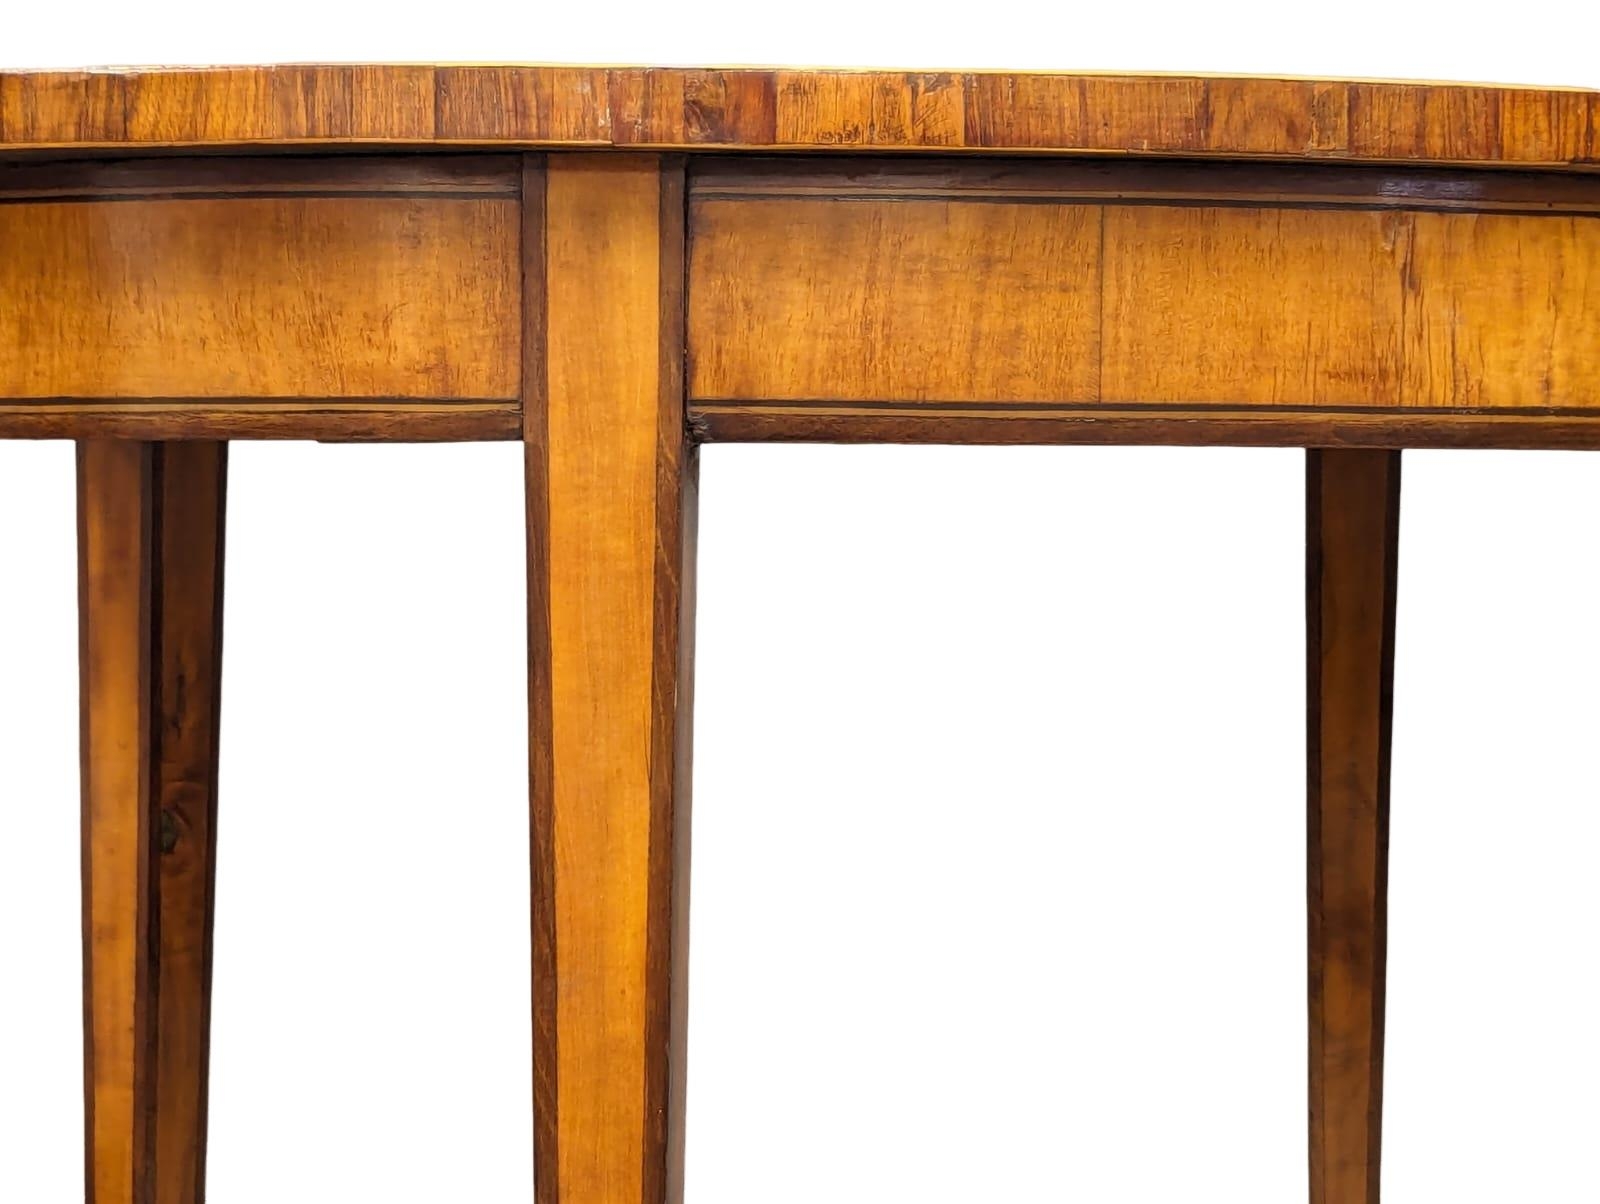 An Early 20th Century Sheraton Revival inlaid Satin and rosewood window table. Circa 1900. 88.5x60. - Image 2 of 4